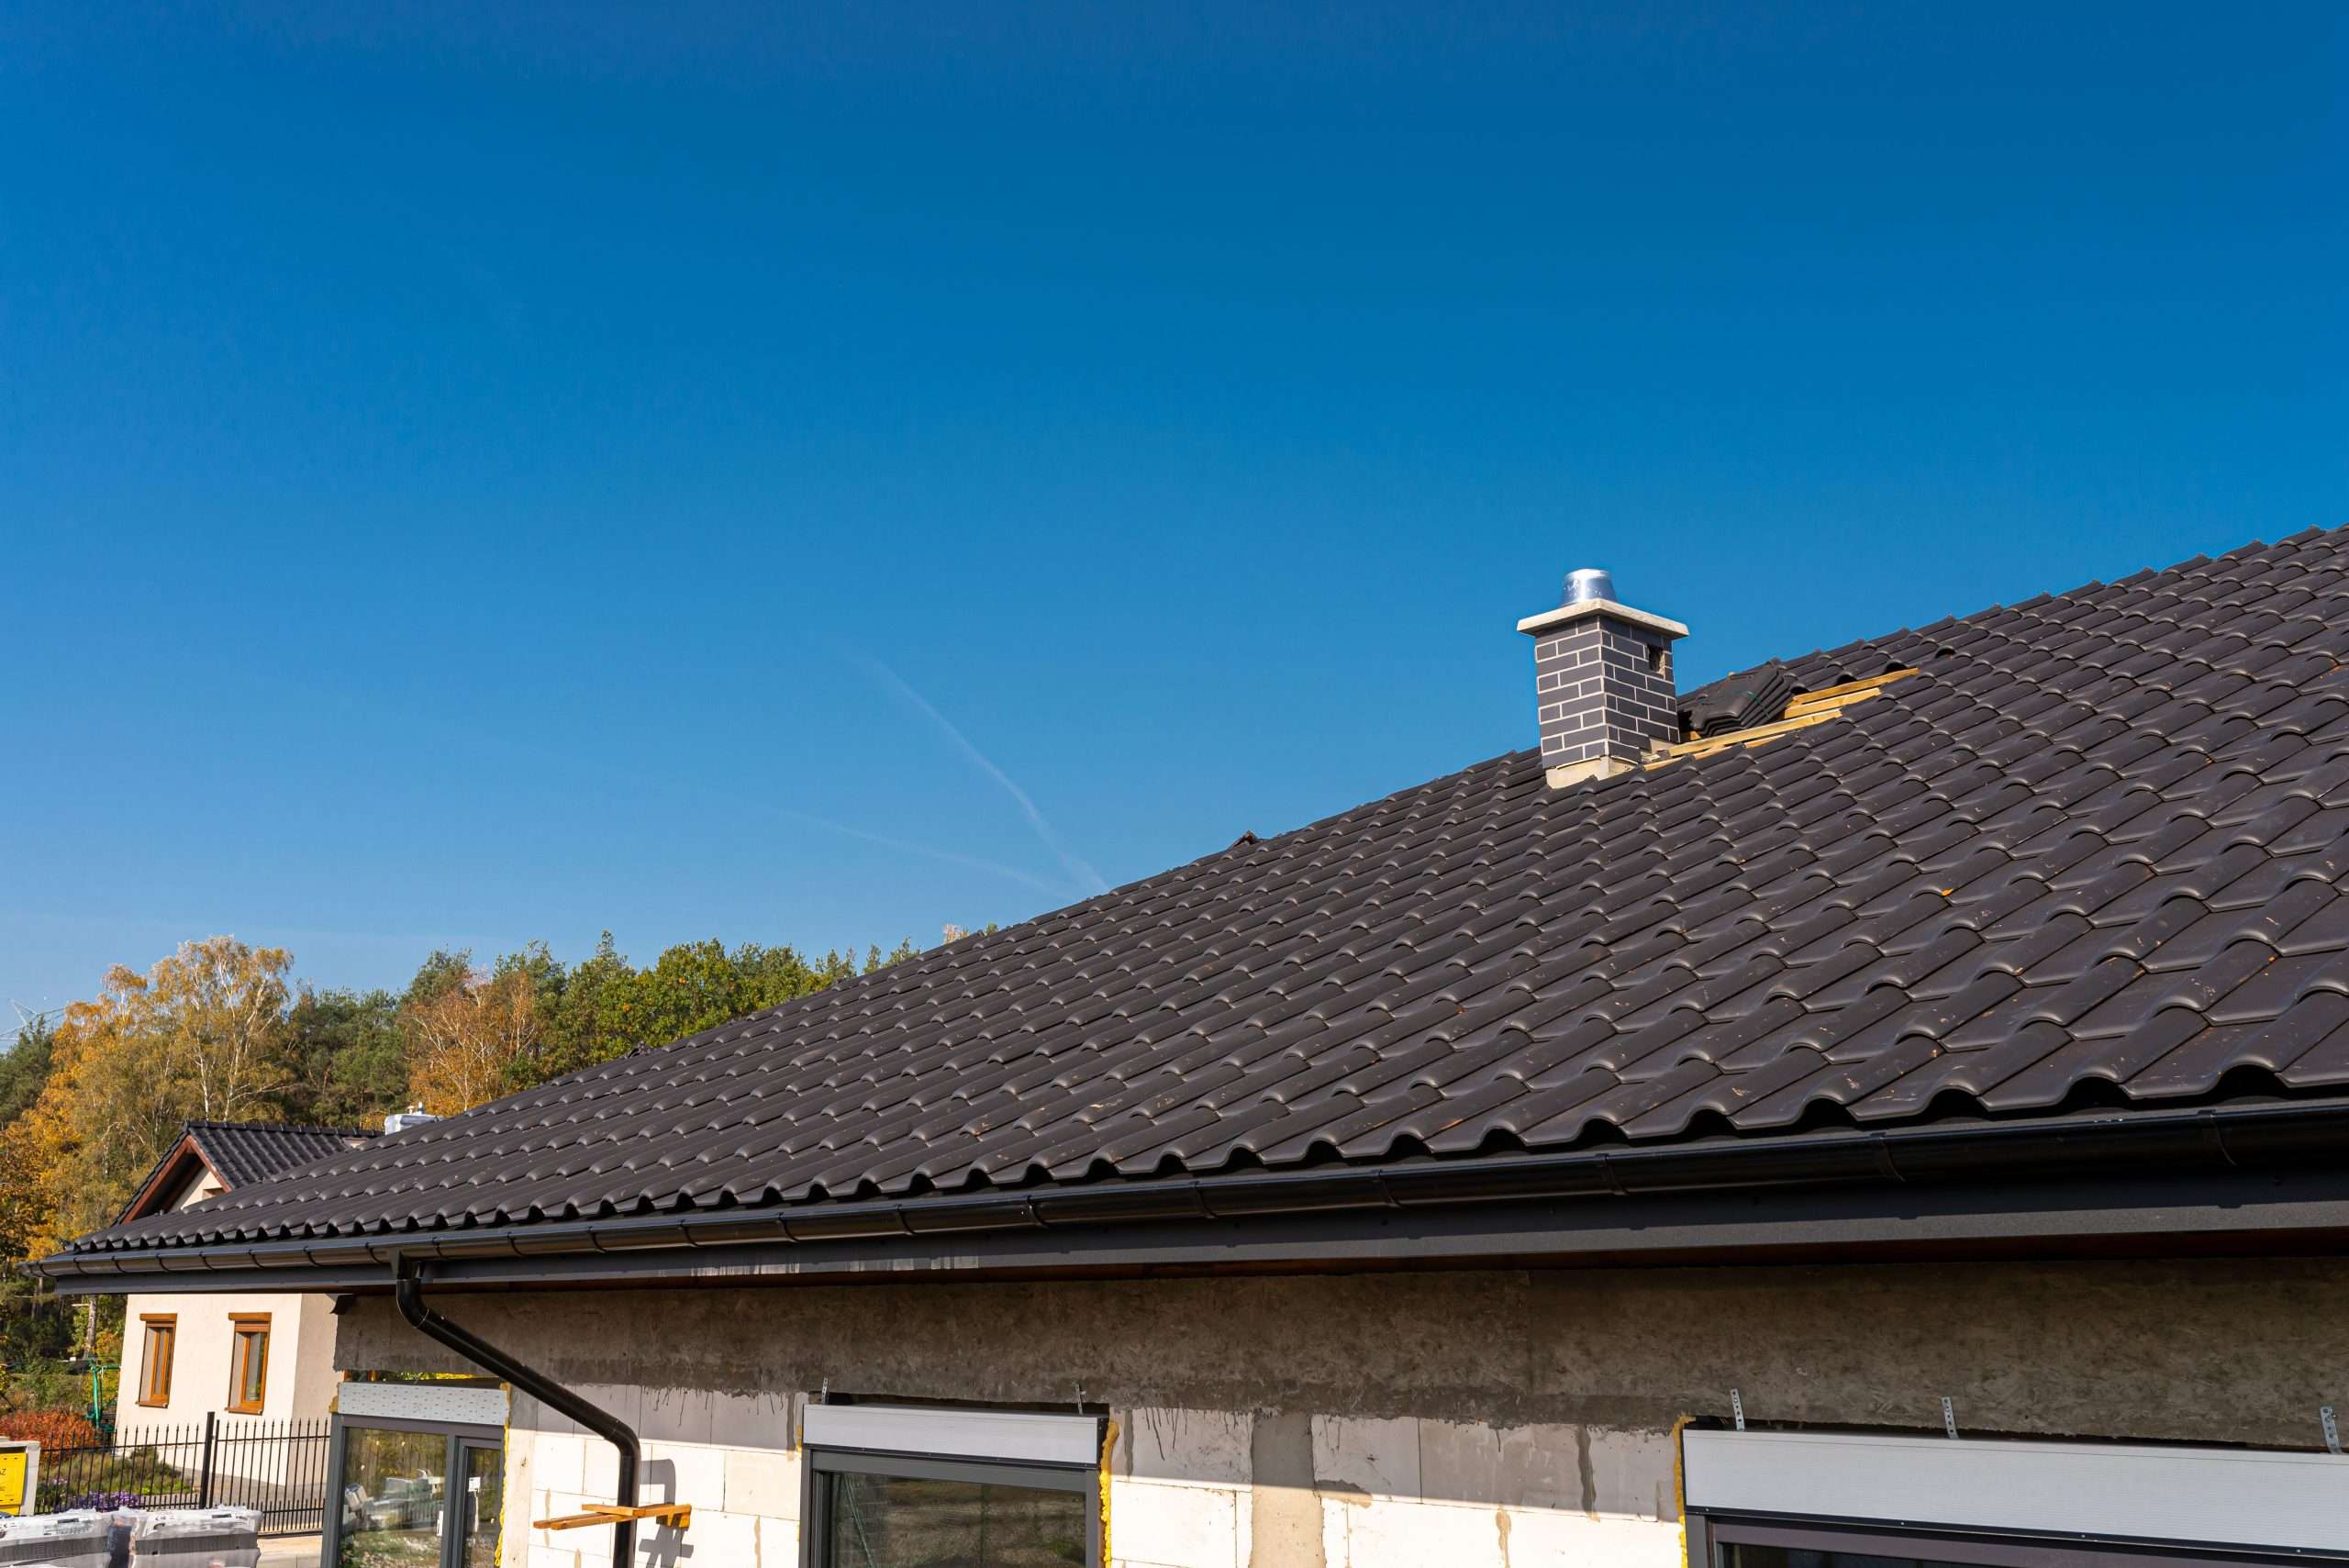 A residential roof with brand new tiles installed, providing a fresh and updated look.